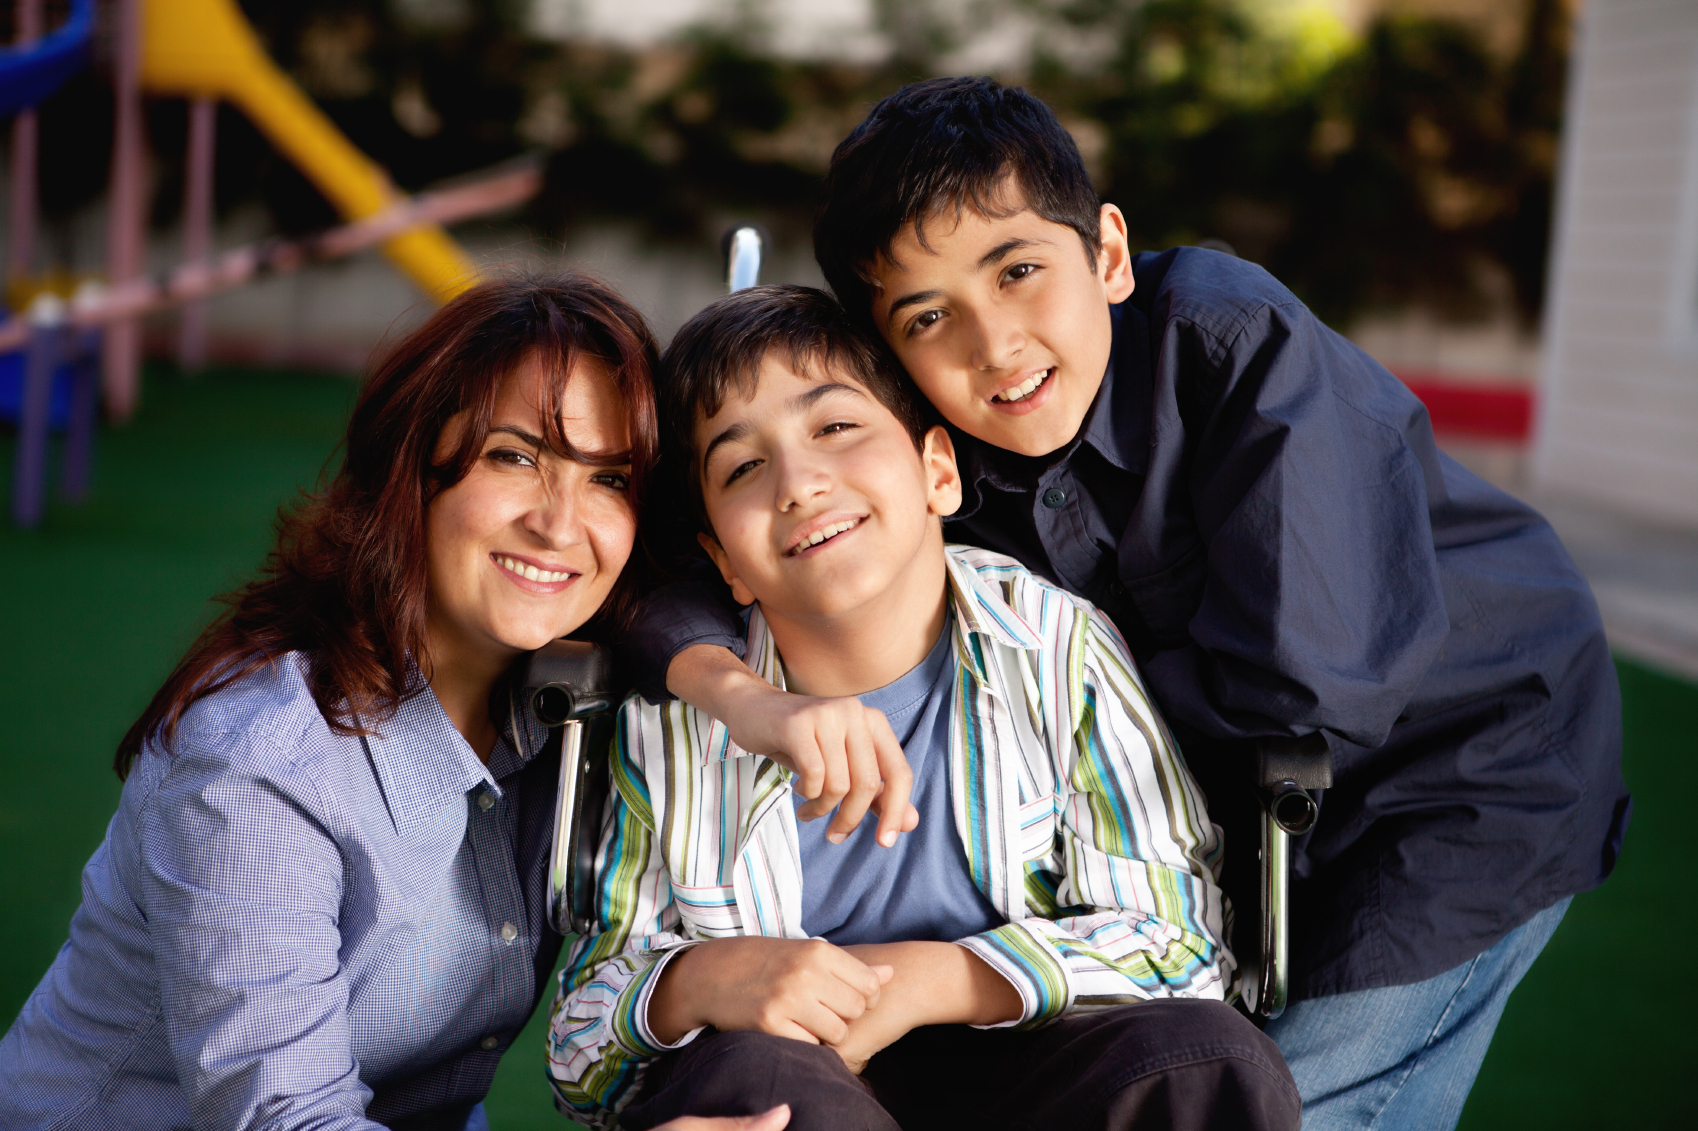 A young boy in a wheelchair with his brother and mother